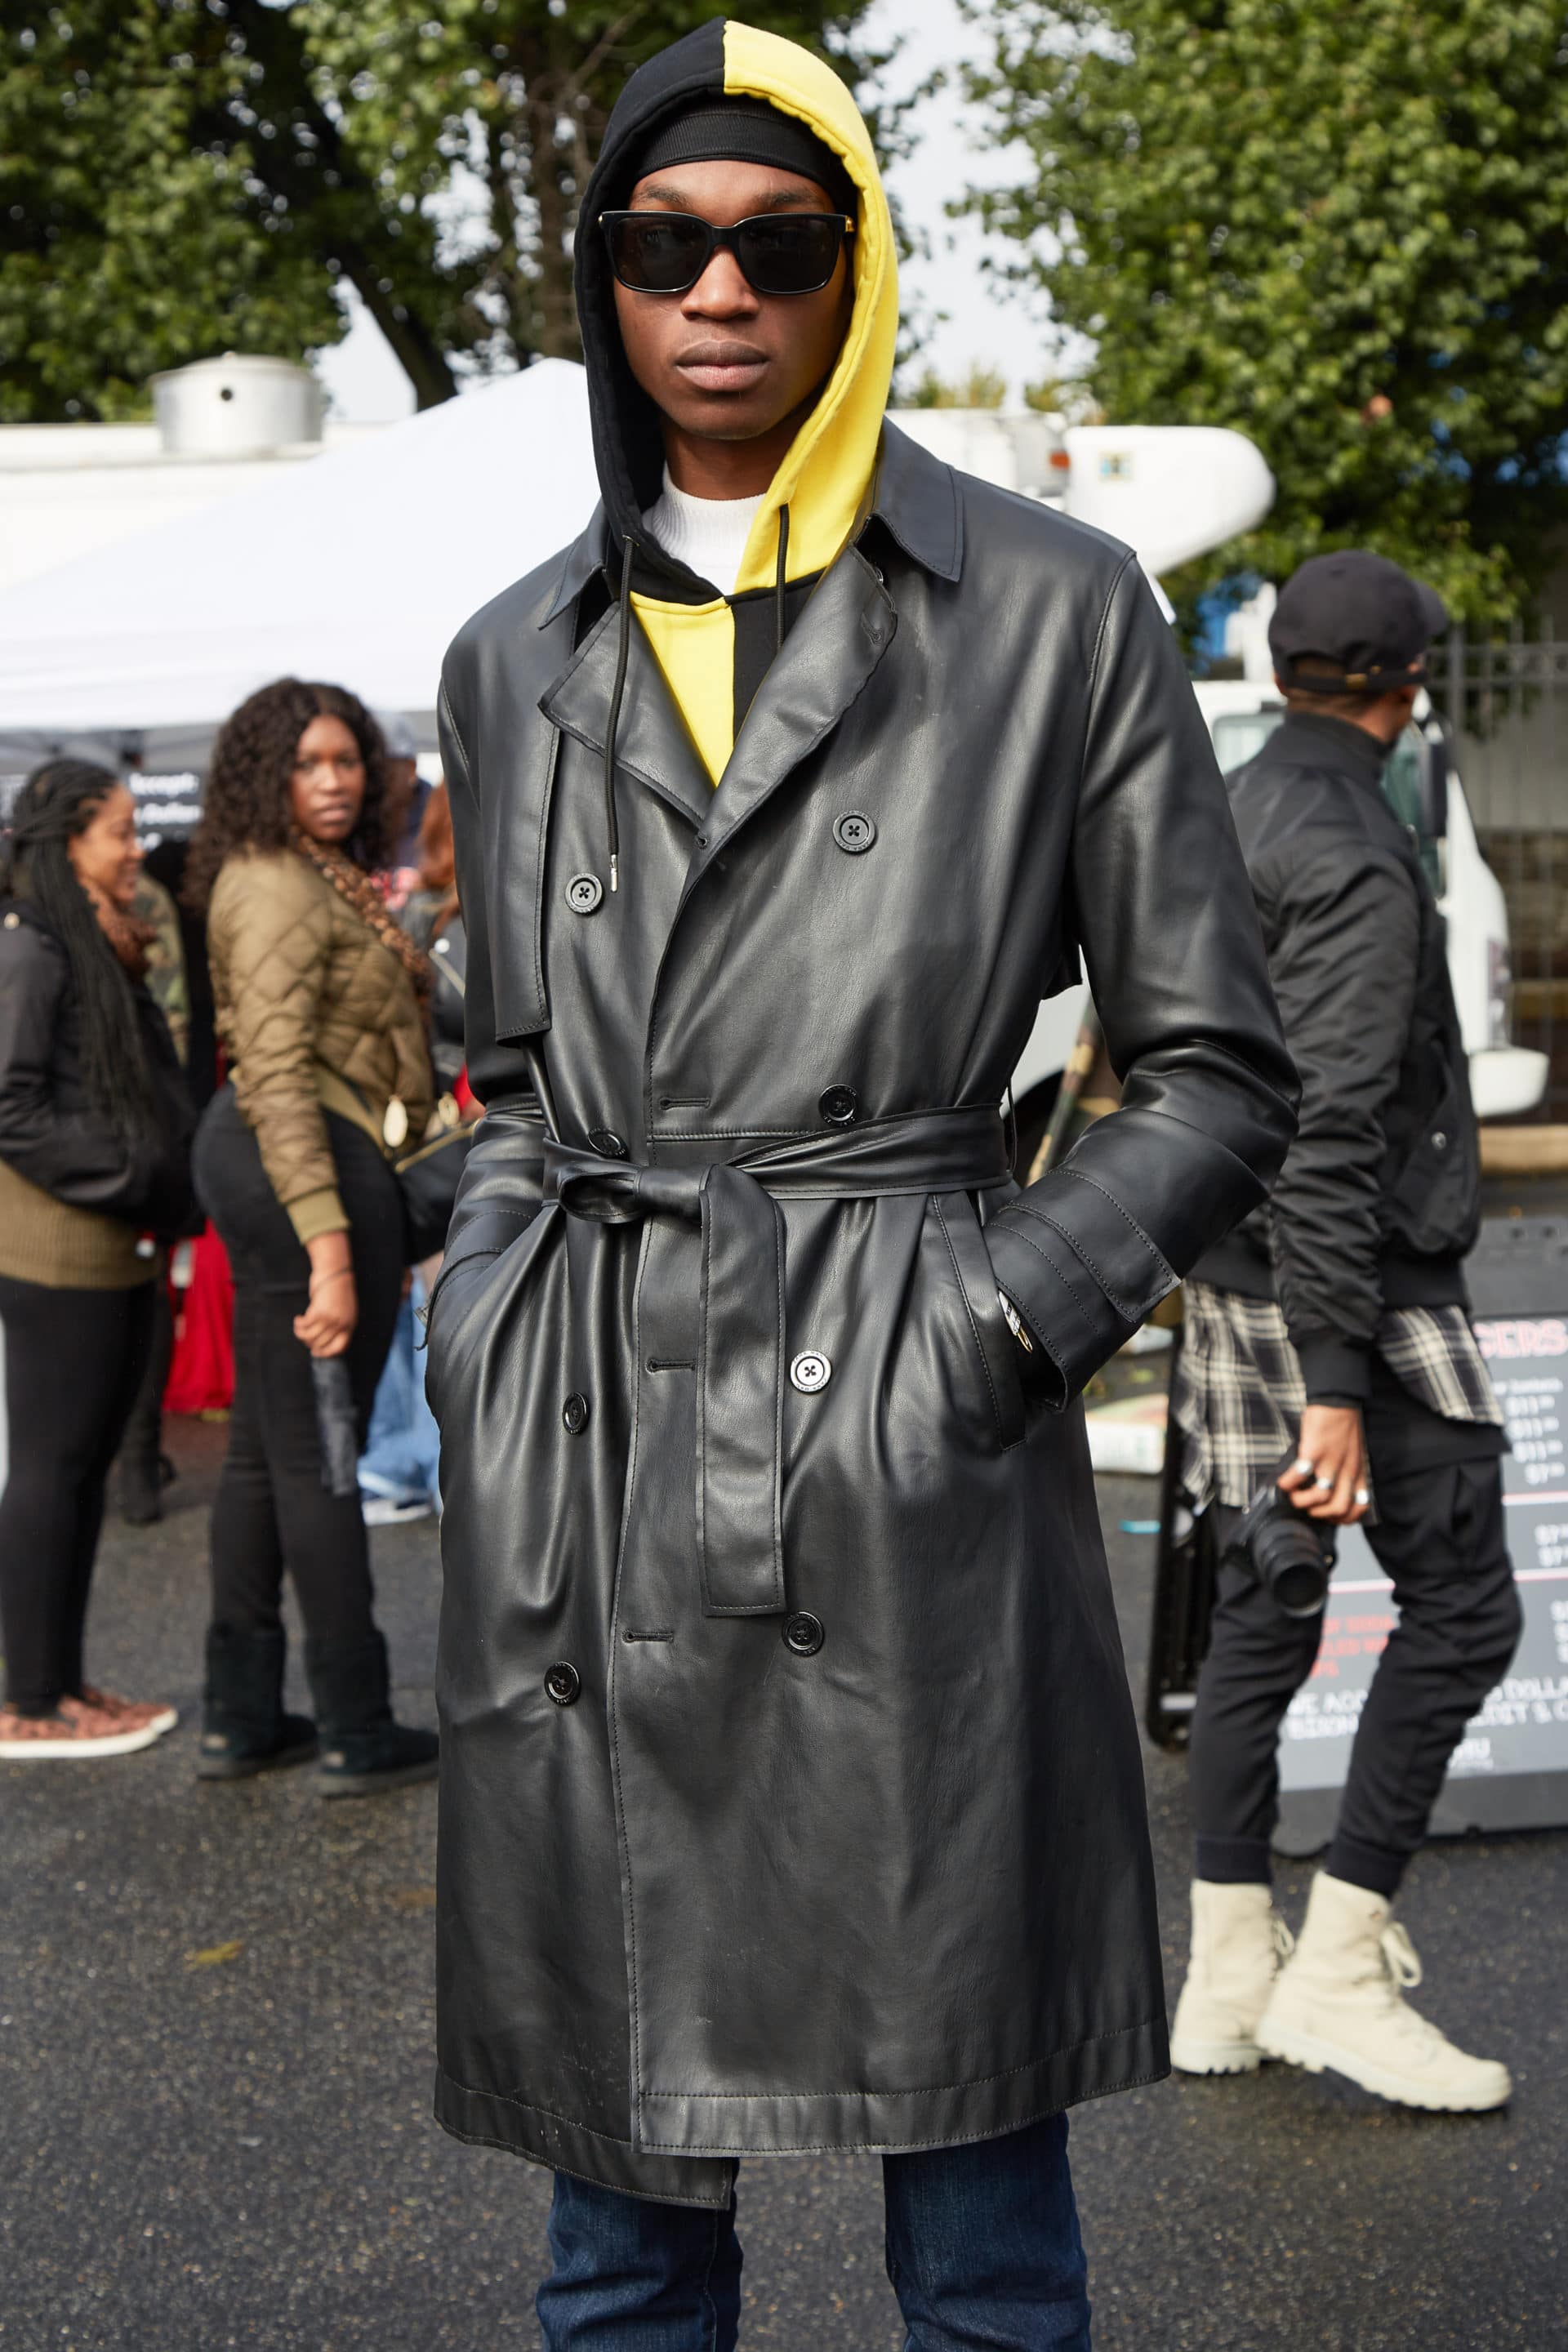 These Street Style Outfits Stormed The Yard At Howard’s Homecoming ...